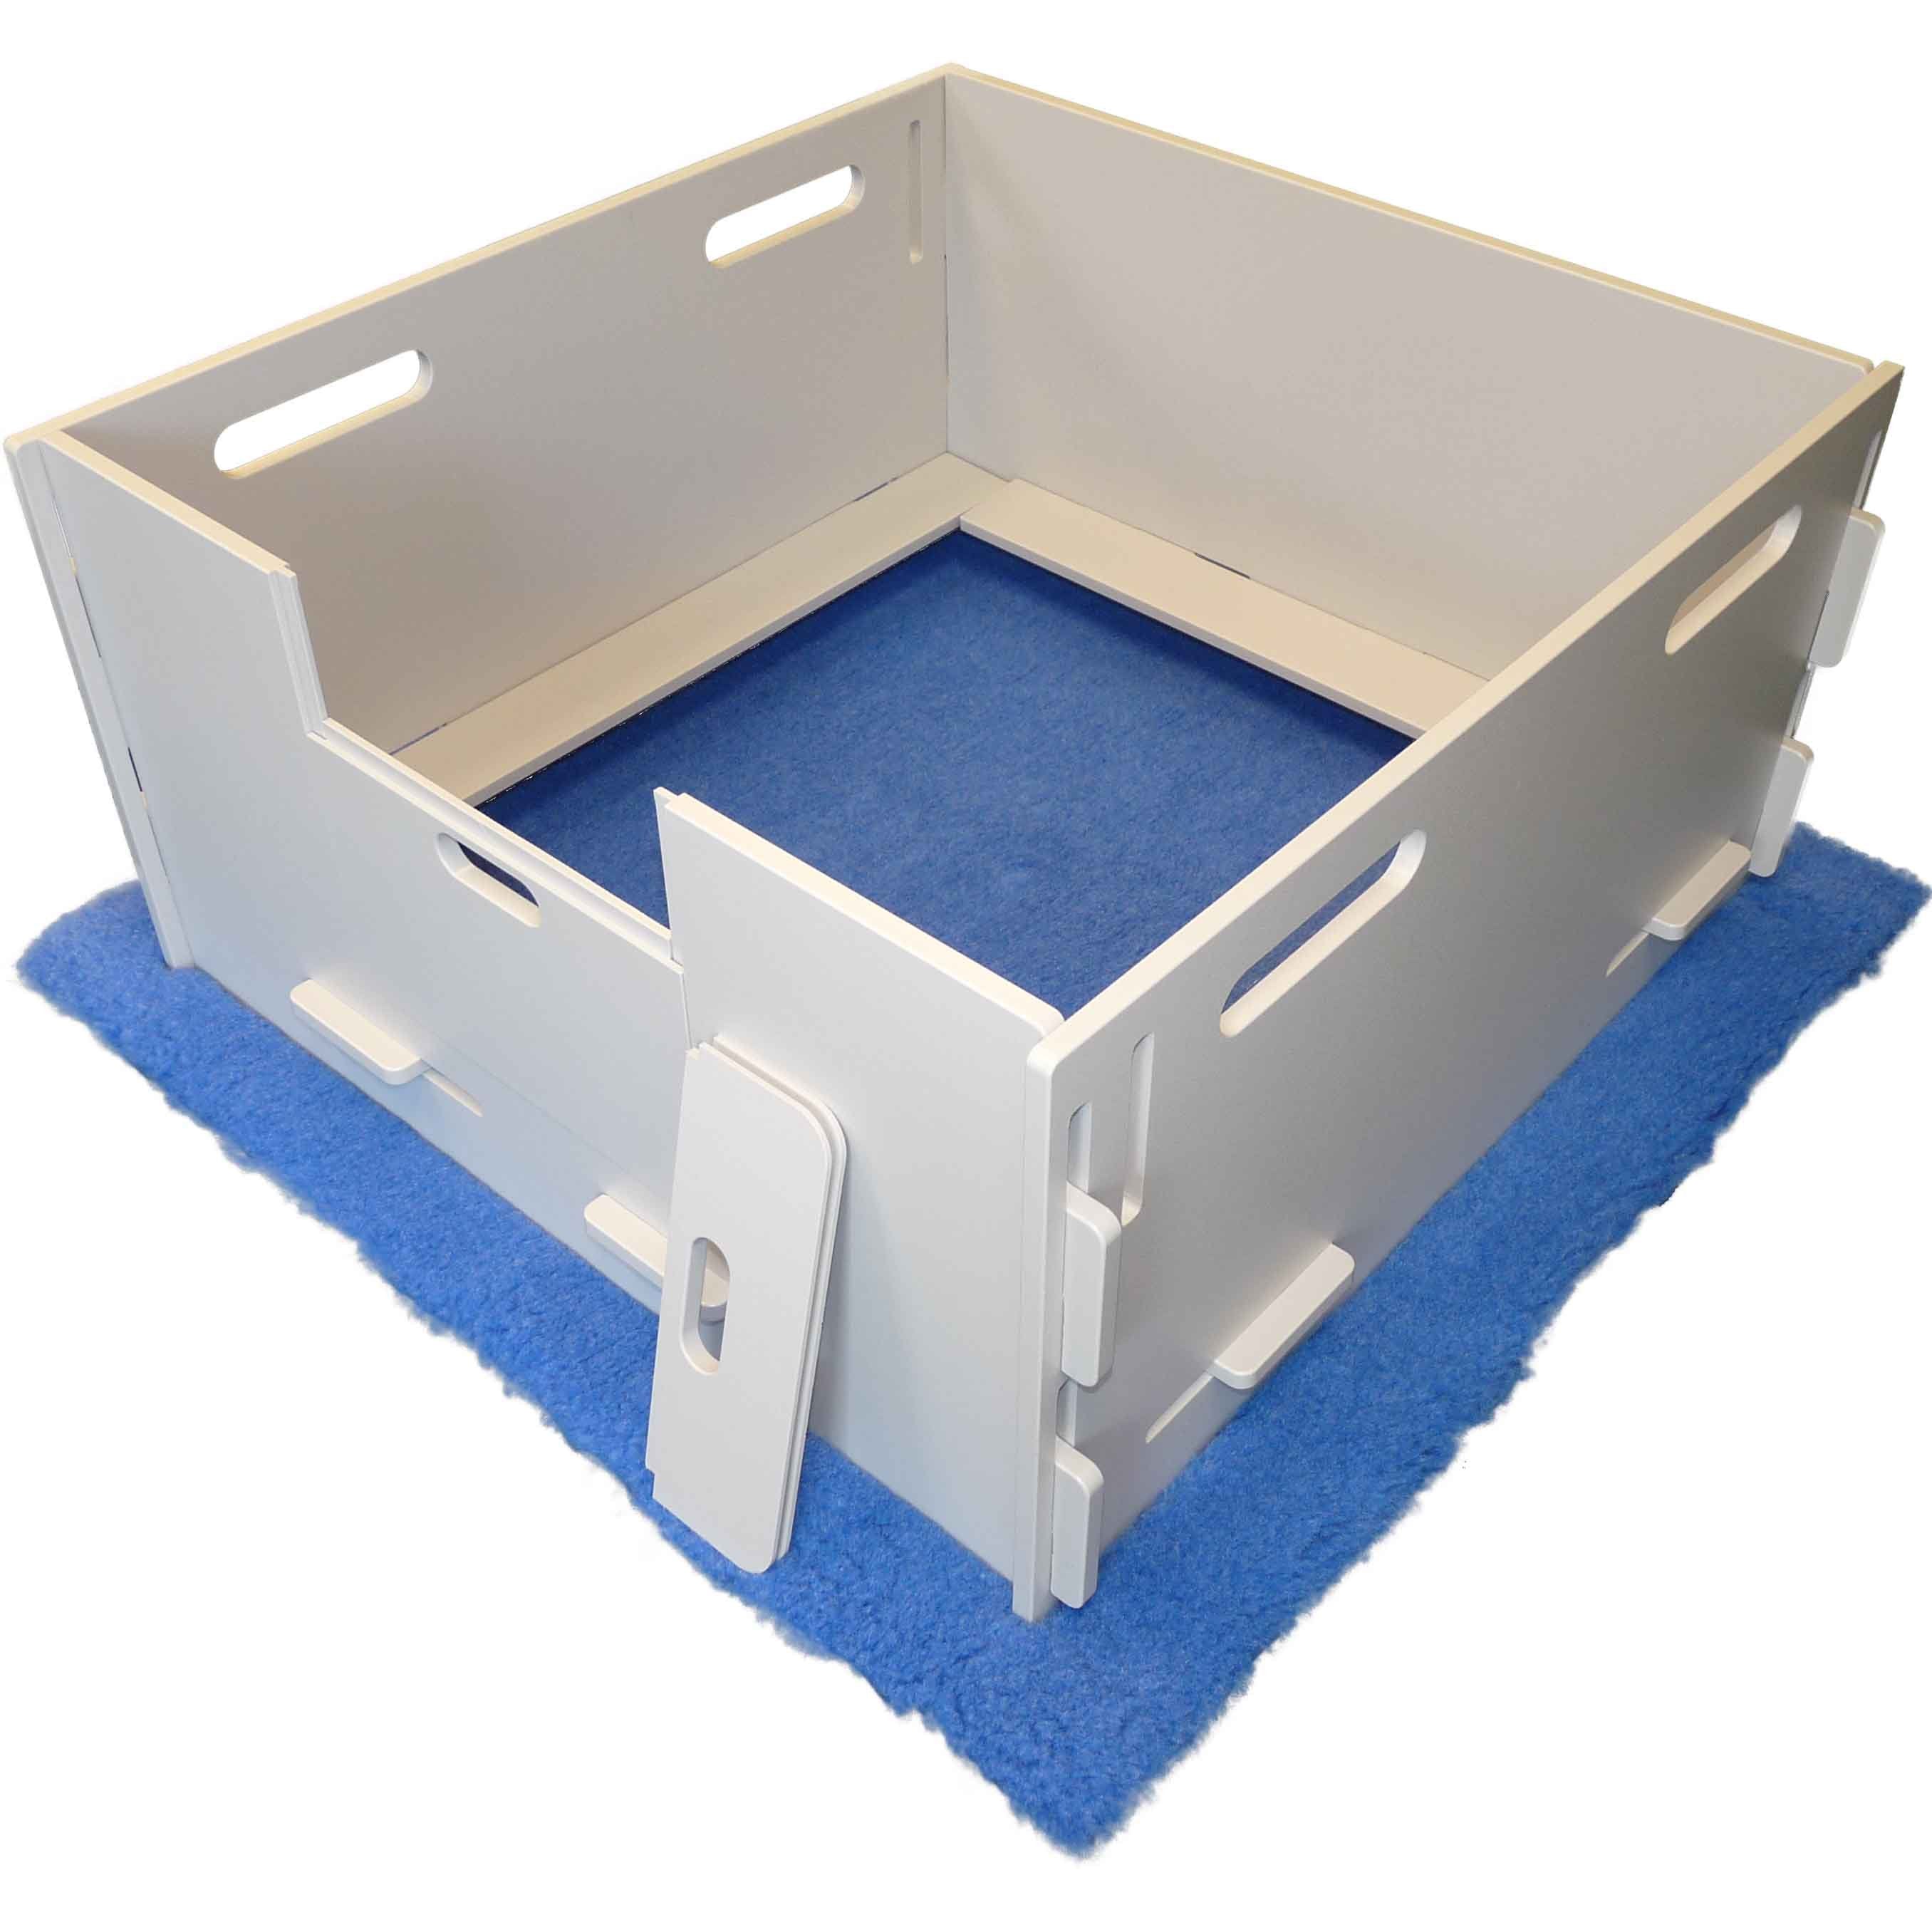 Lakeside Products - Veterinary Bedding Liner Pad for Whelping Boxes